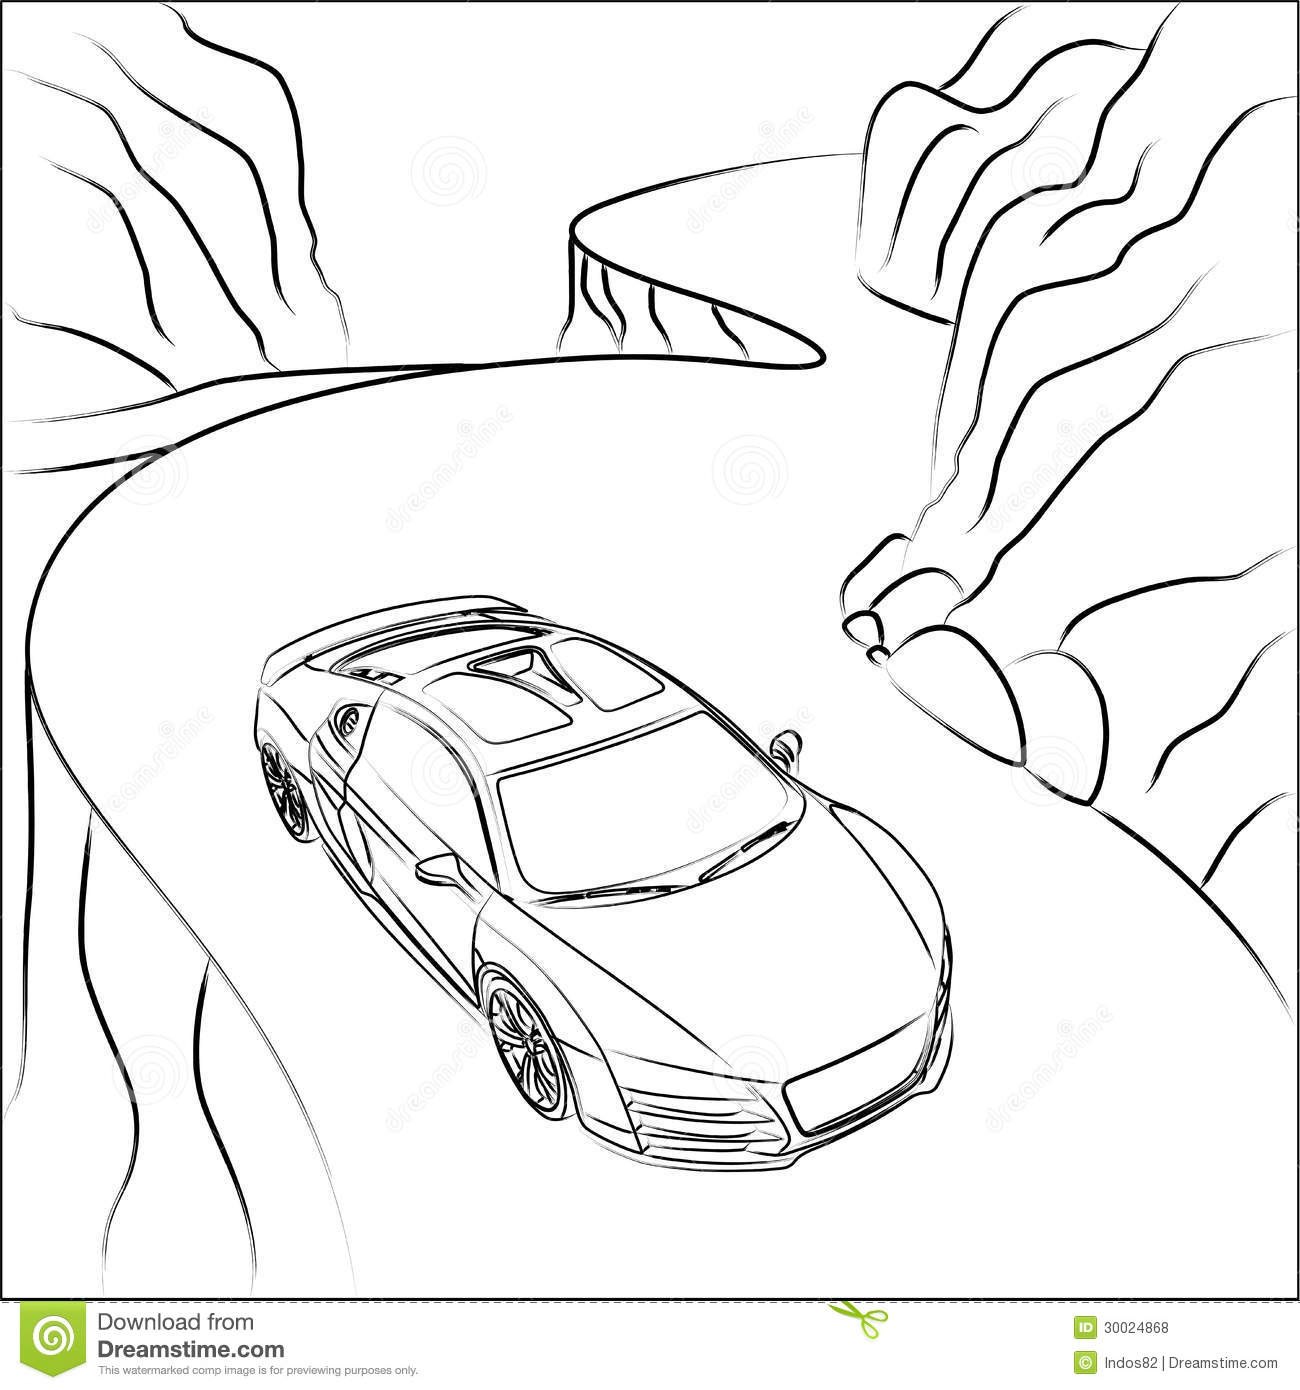 Black And White Illustration Of A Sport Car On A Mountain Road